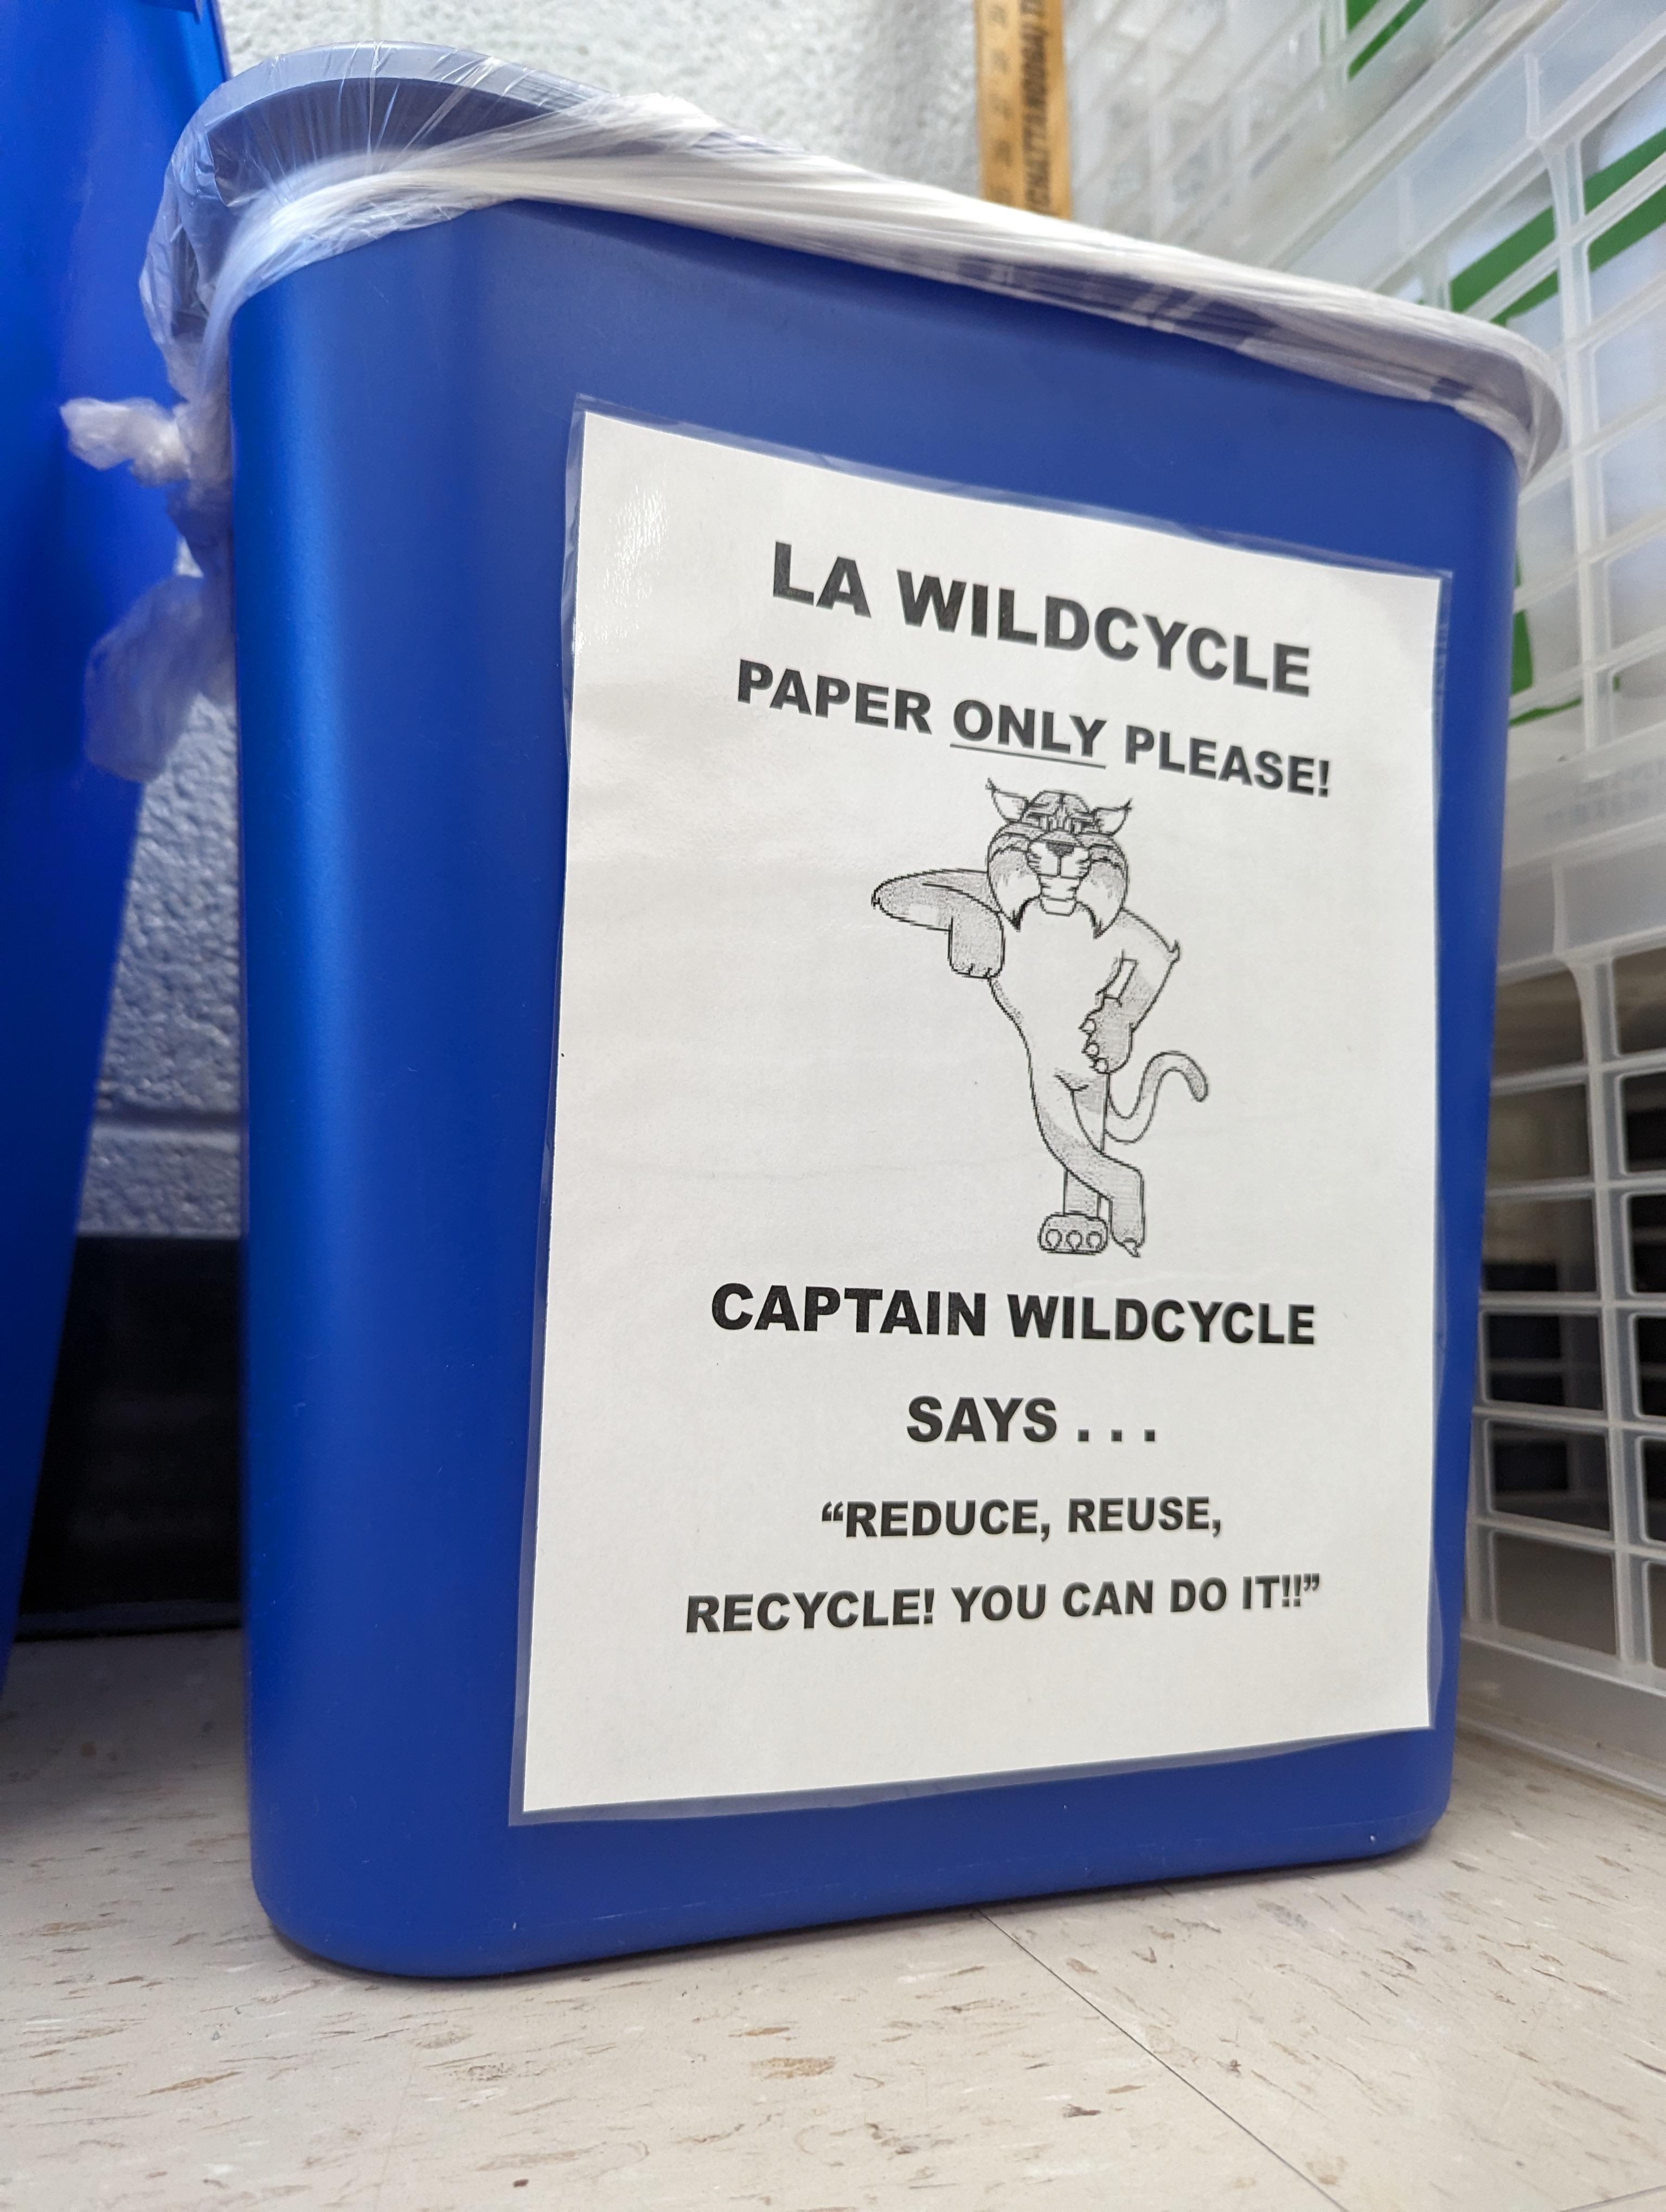 Pictured: Captain Wildcycle, the official mascot of the program. 